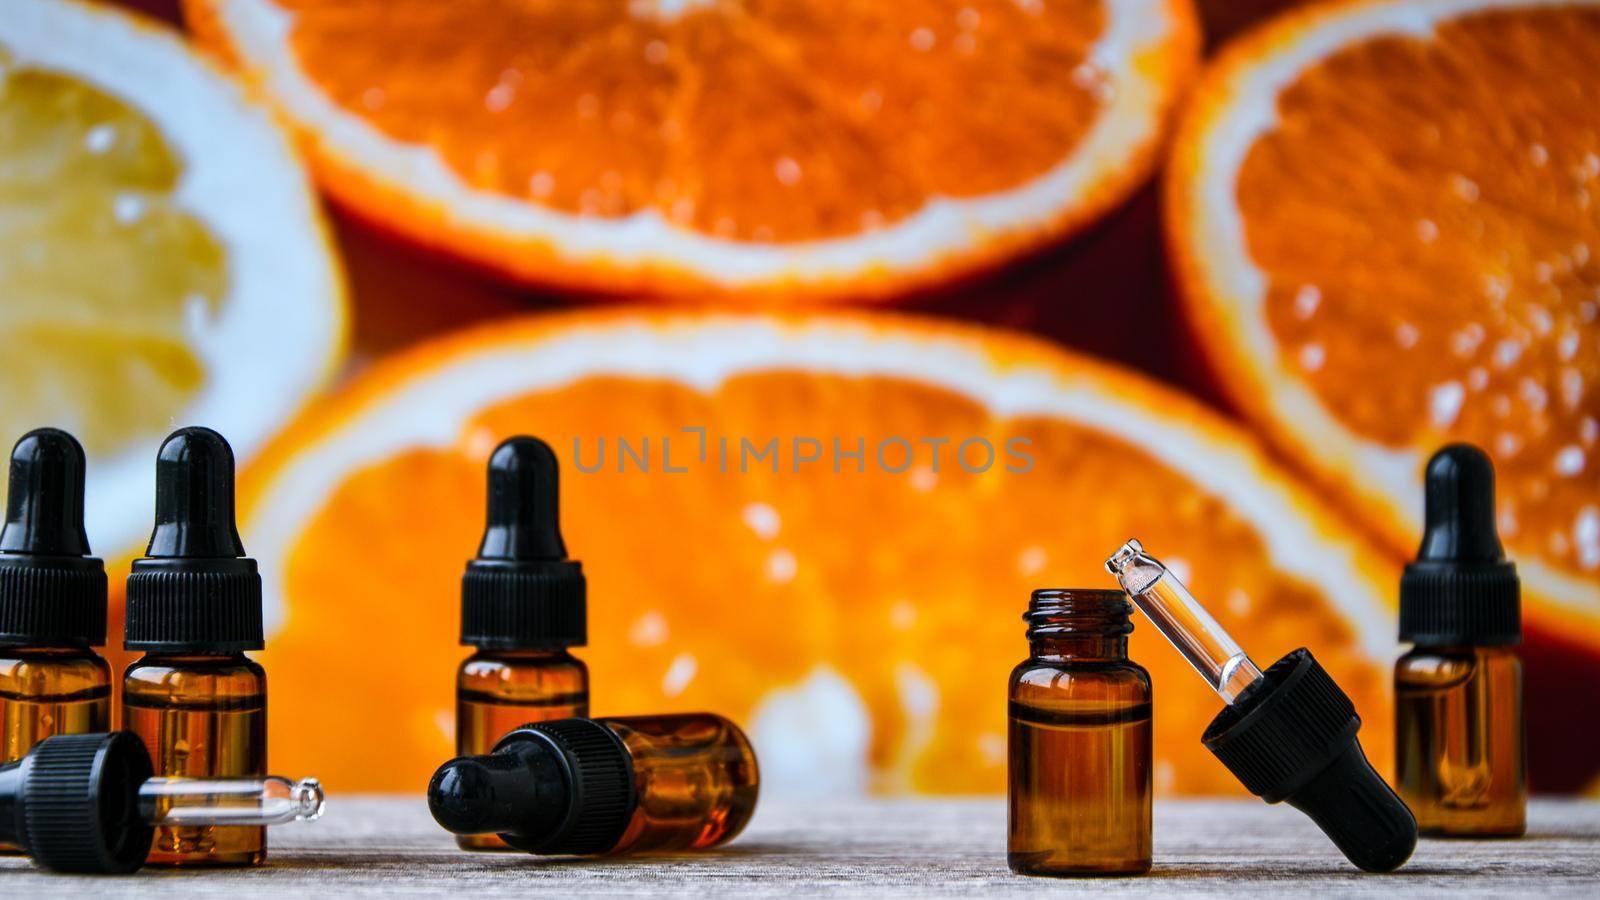 Bottle of essential oil from oranges on wooden background with pieces of oranges - alternative medicine. Essential aroma oil with oranges. Citrus oil for skin care, spa, wellness, massage, aromatherapy and natural medicine